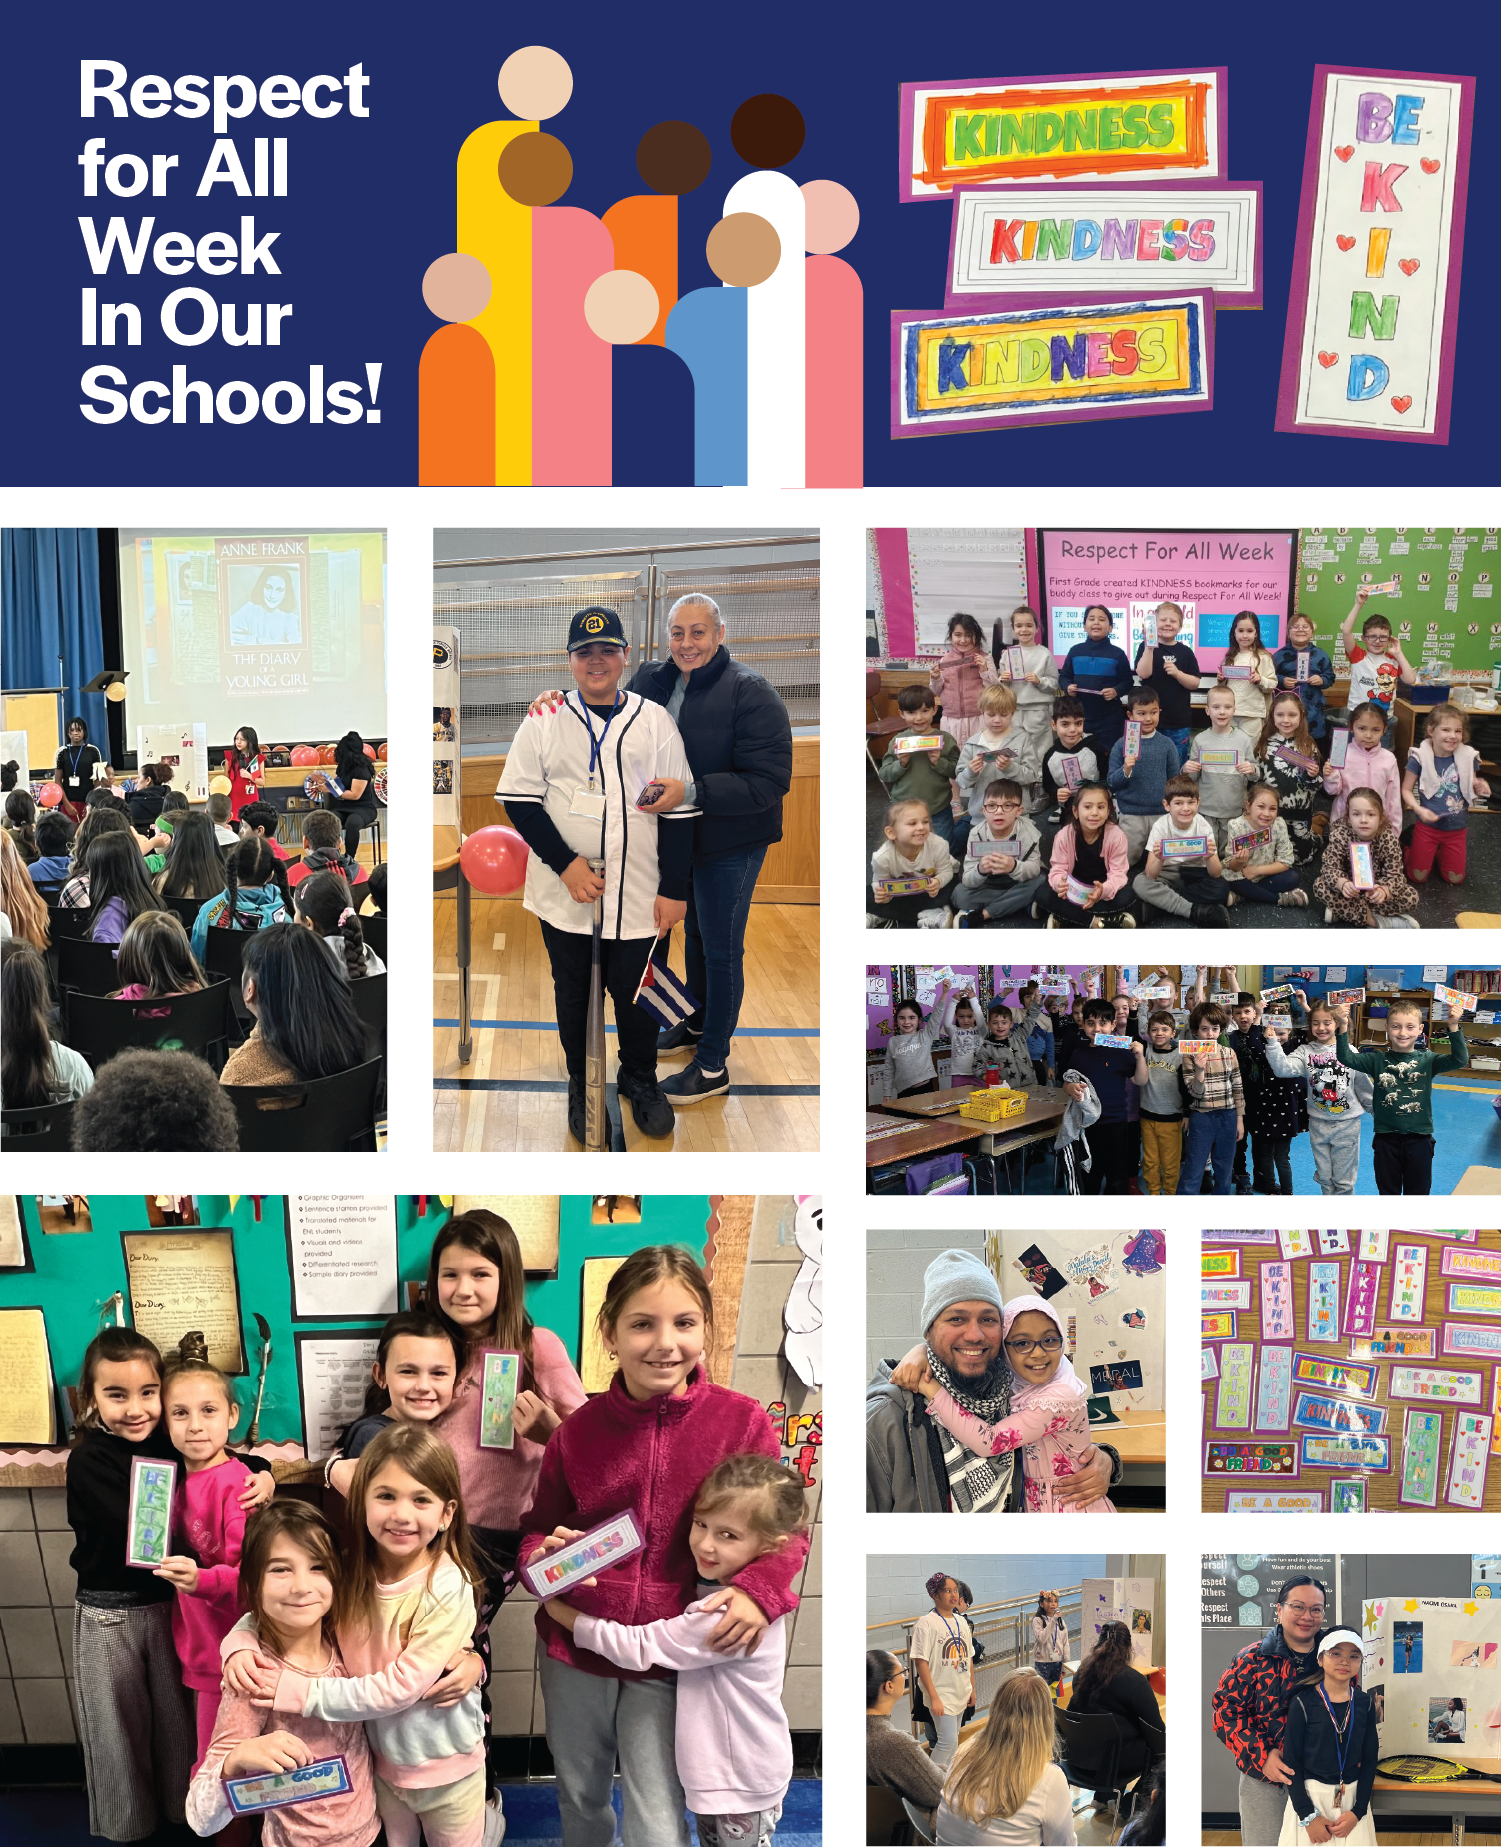 Series of photo of students, families and teachers during RFA week.